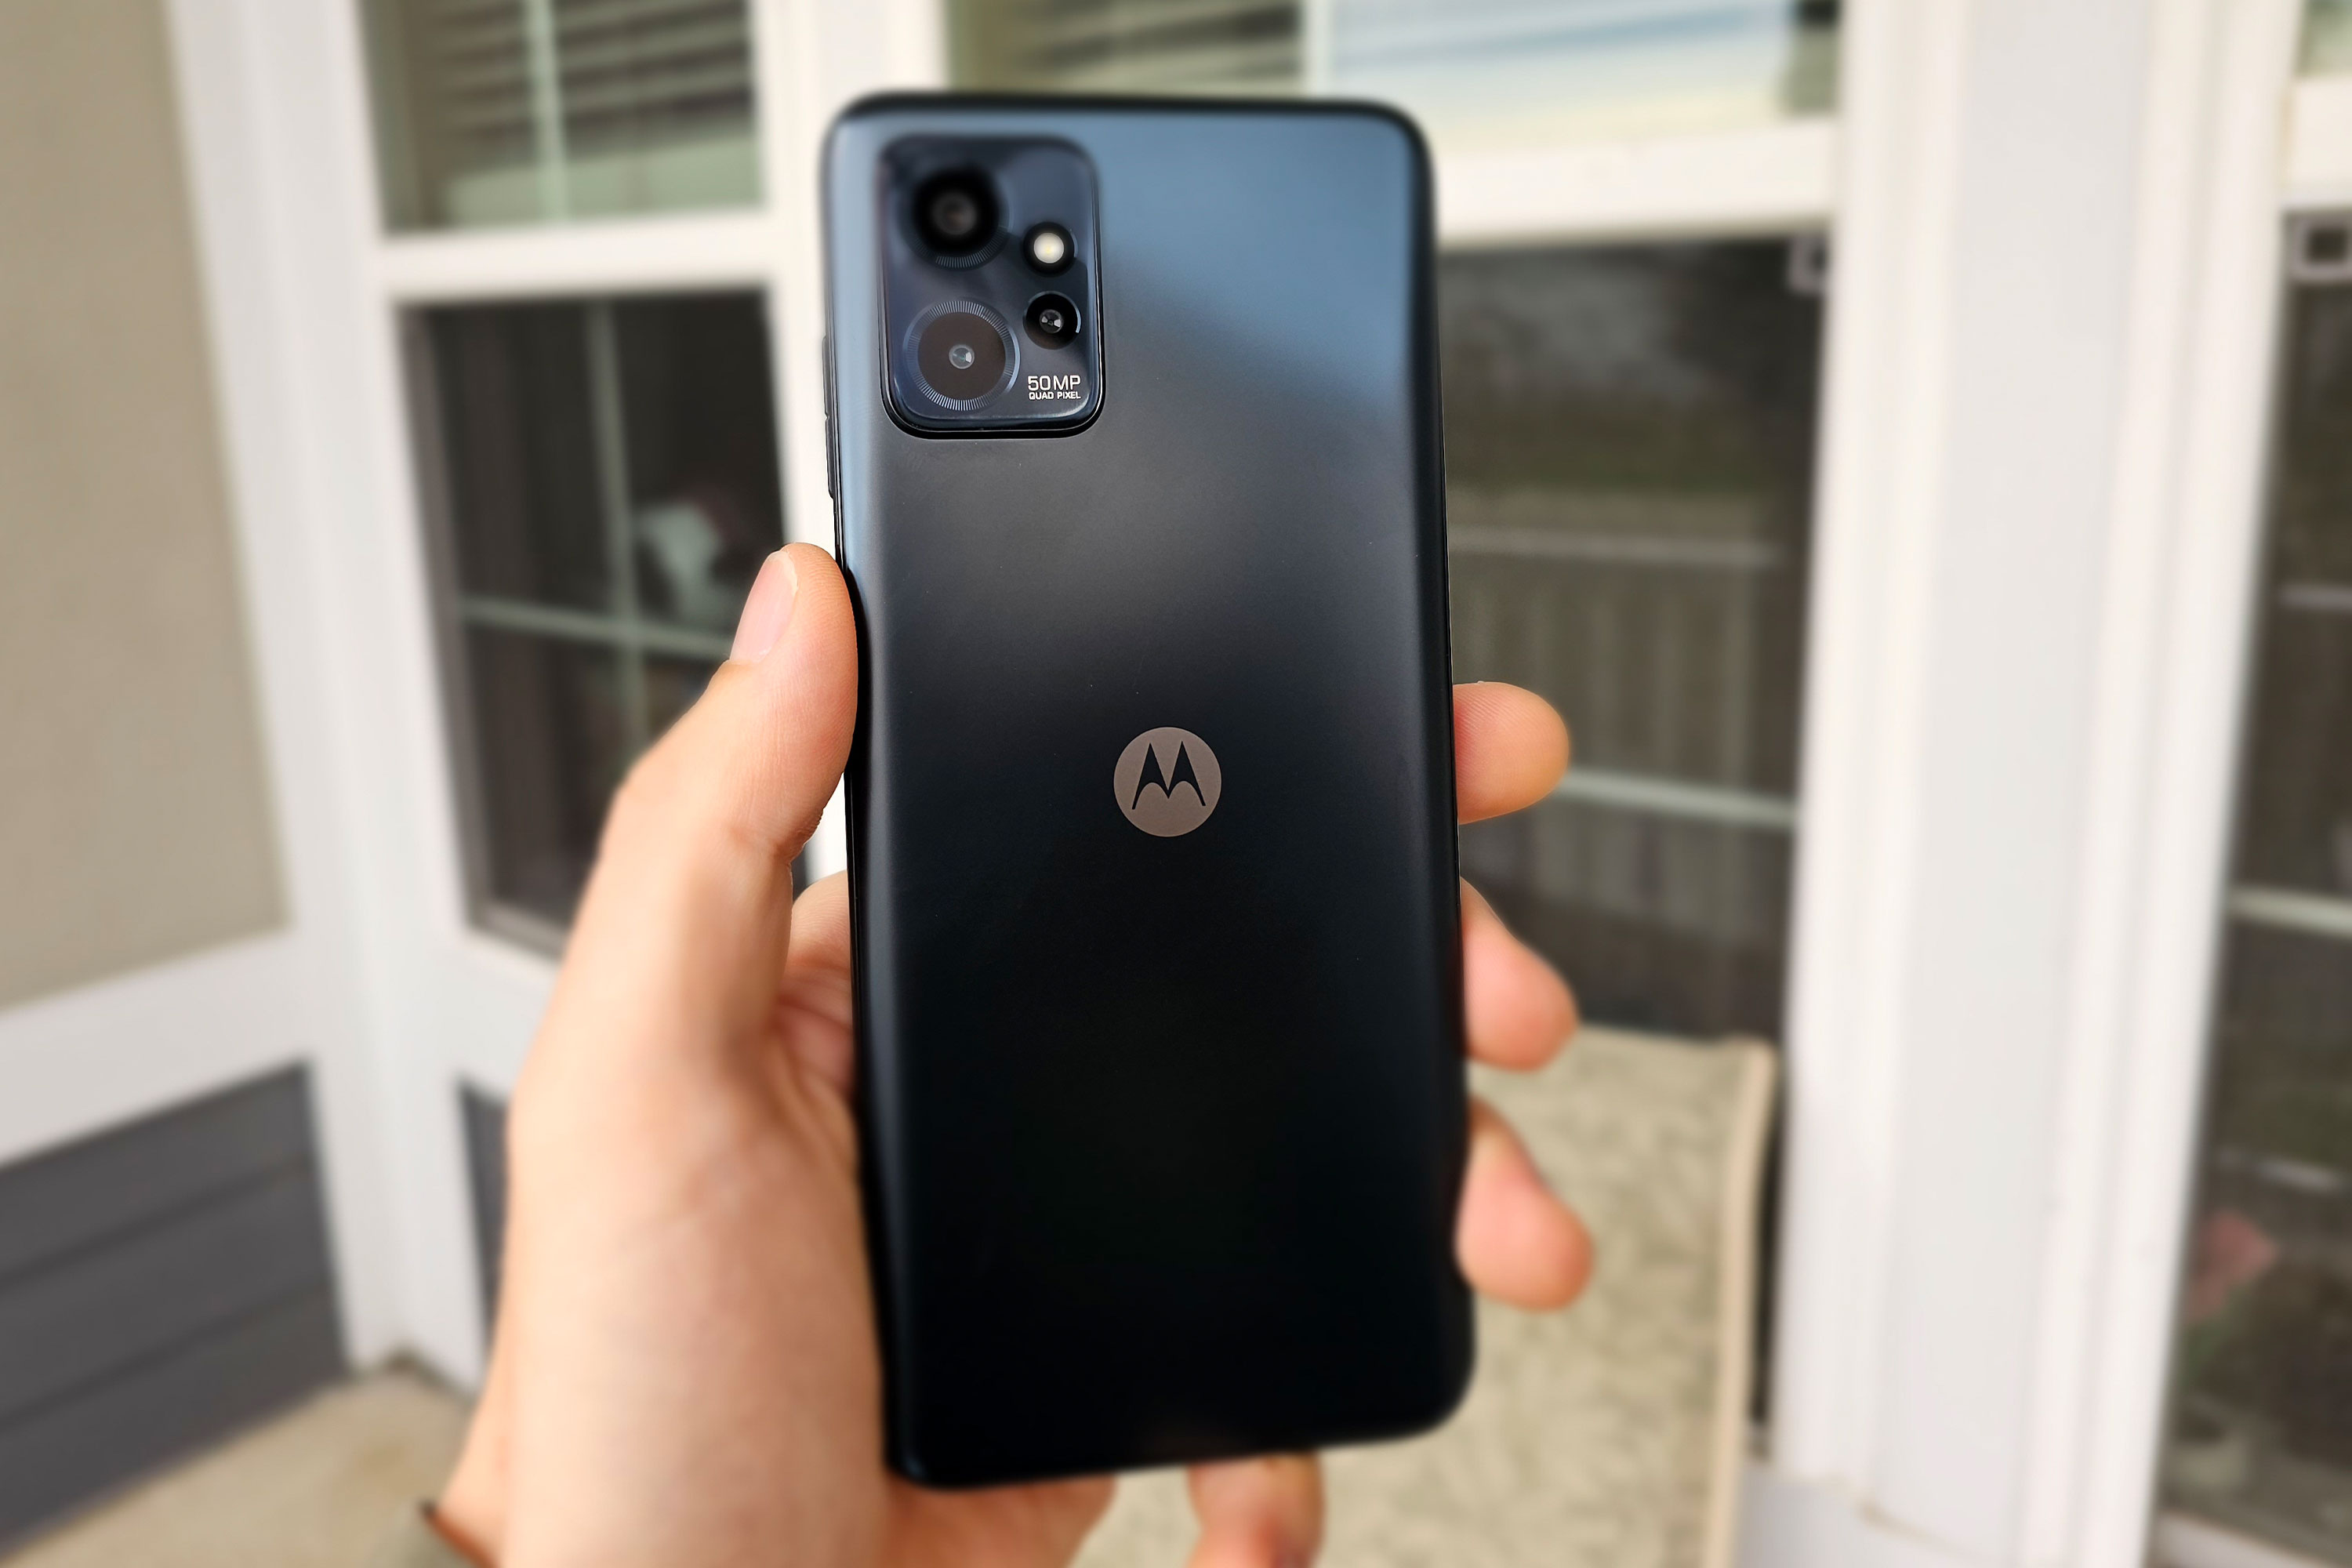 Moto G84 5G Full Review! - My Review 